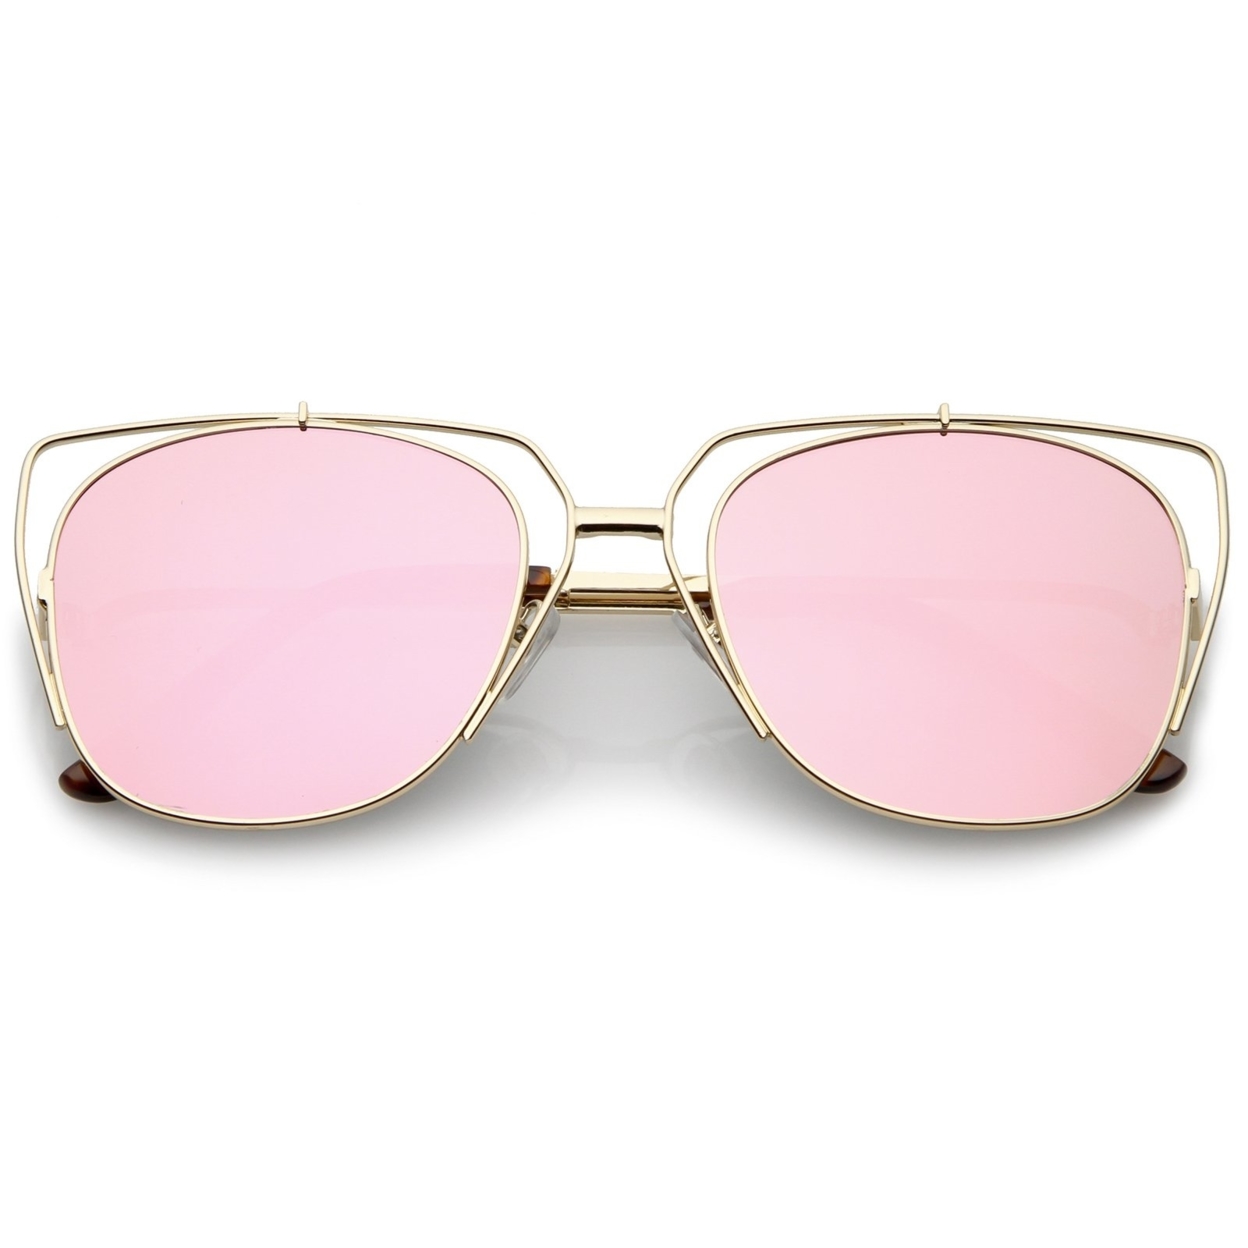 Women's Open Metal Cat Eye Sunglasses With Mirrored Flat Lens And Slim Arms 55mm - Gold / Pink Mirror